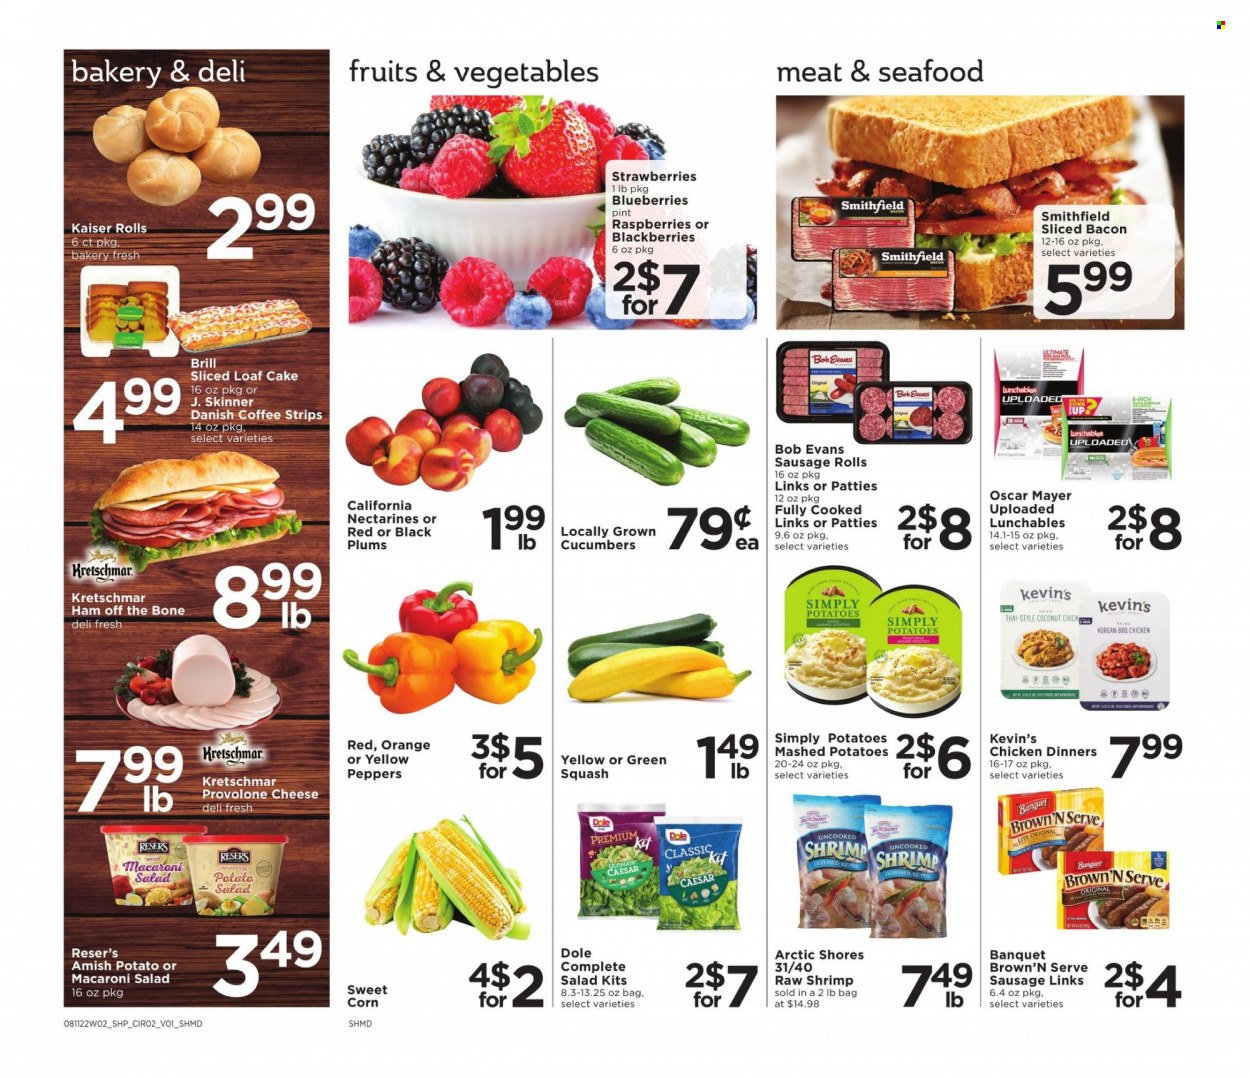 thumbnail - Shoppers Flyer - 08/11/2022 - 08/17/2022 - Sales products - sausage rolls, cake, loaf cake, corn, cucumber, zucchini, salad, Dole, peppers, sweet corn, blackberries, blueberries, strawberries, plums, oranges, coconut, seafood, shrimps, Arctic Shores, mashed potatoes, Lunchables, Bob Evans, bacon, ham, ham off the bone, Oscar Mayer, sausage, potato salad, macaroni salad, cheese, Provolone, eggs, strips, Skinner Pasta, coffee, nectarines, black plums. Page 2.